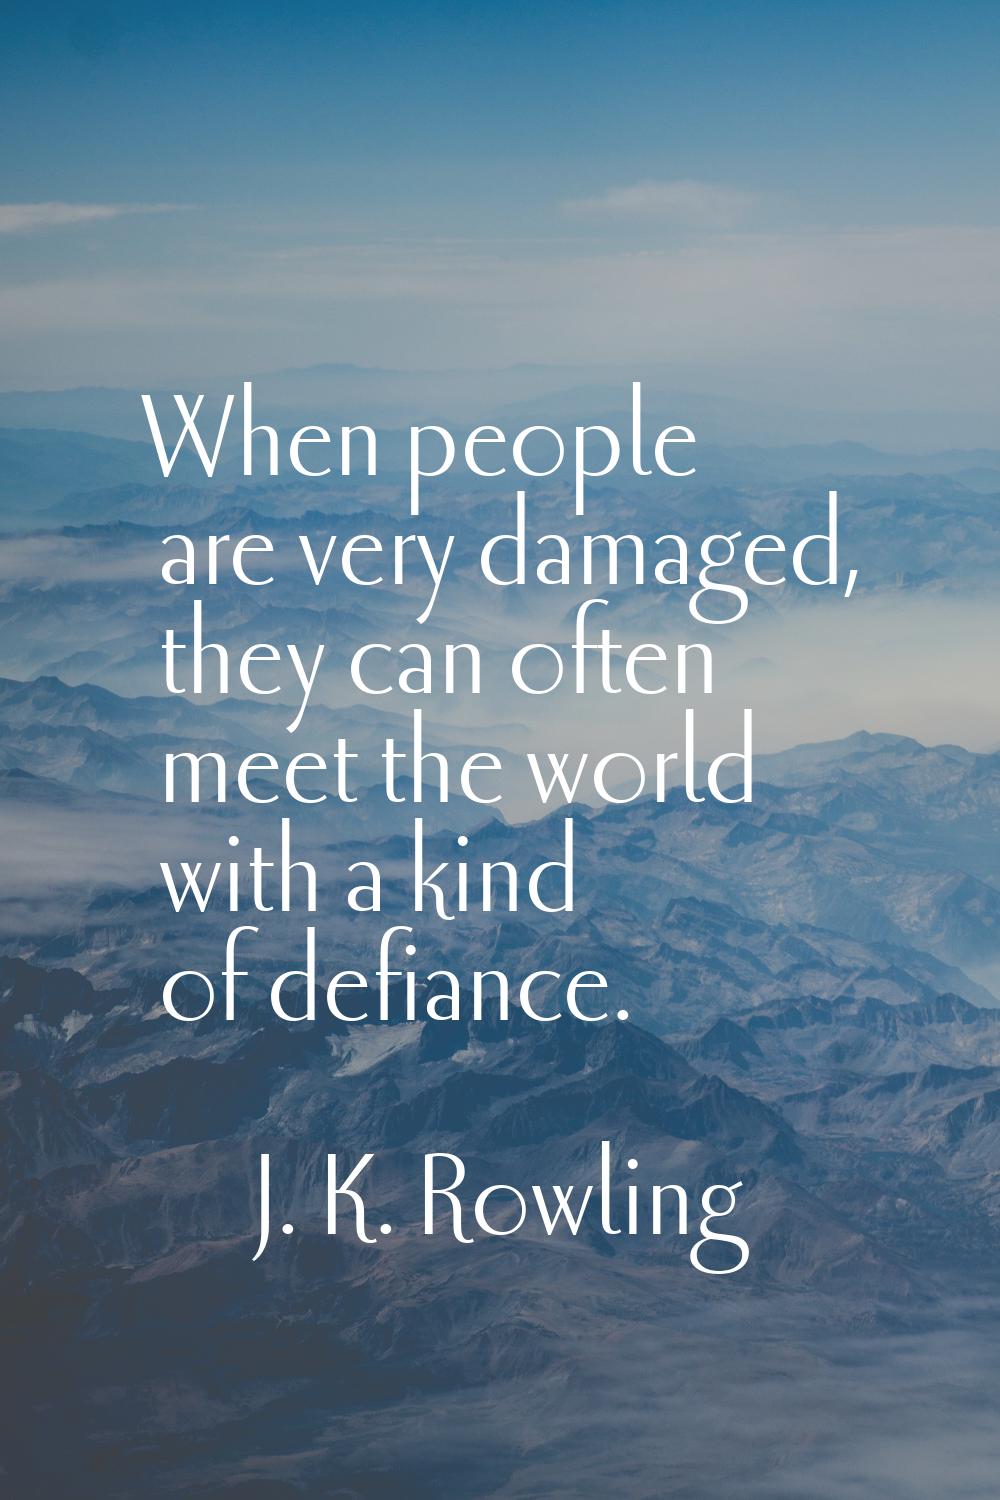 When people are very damaged, they can often meet the world with a kind of defiance.